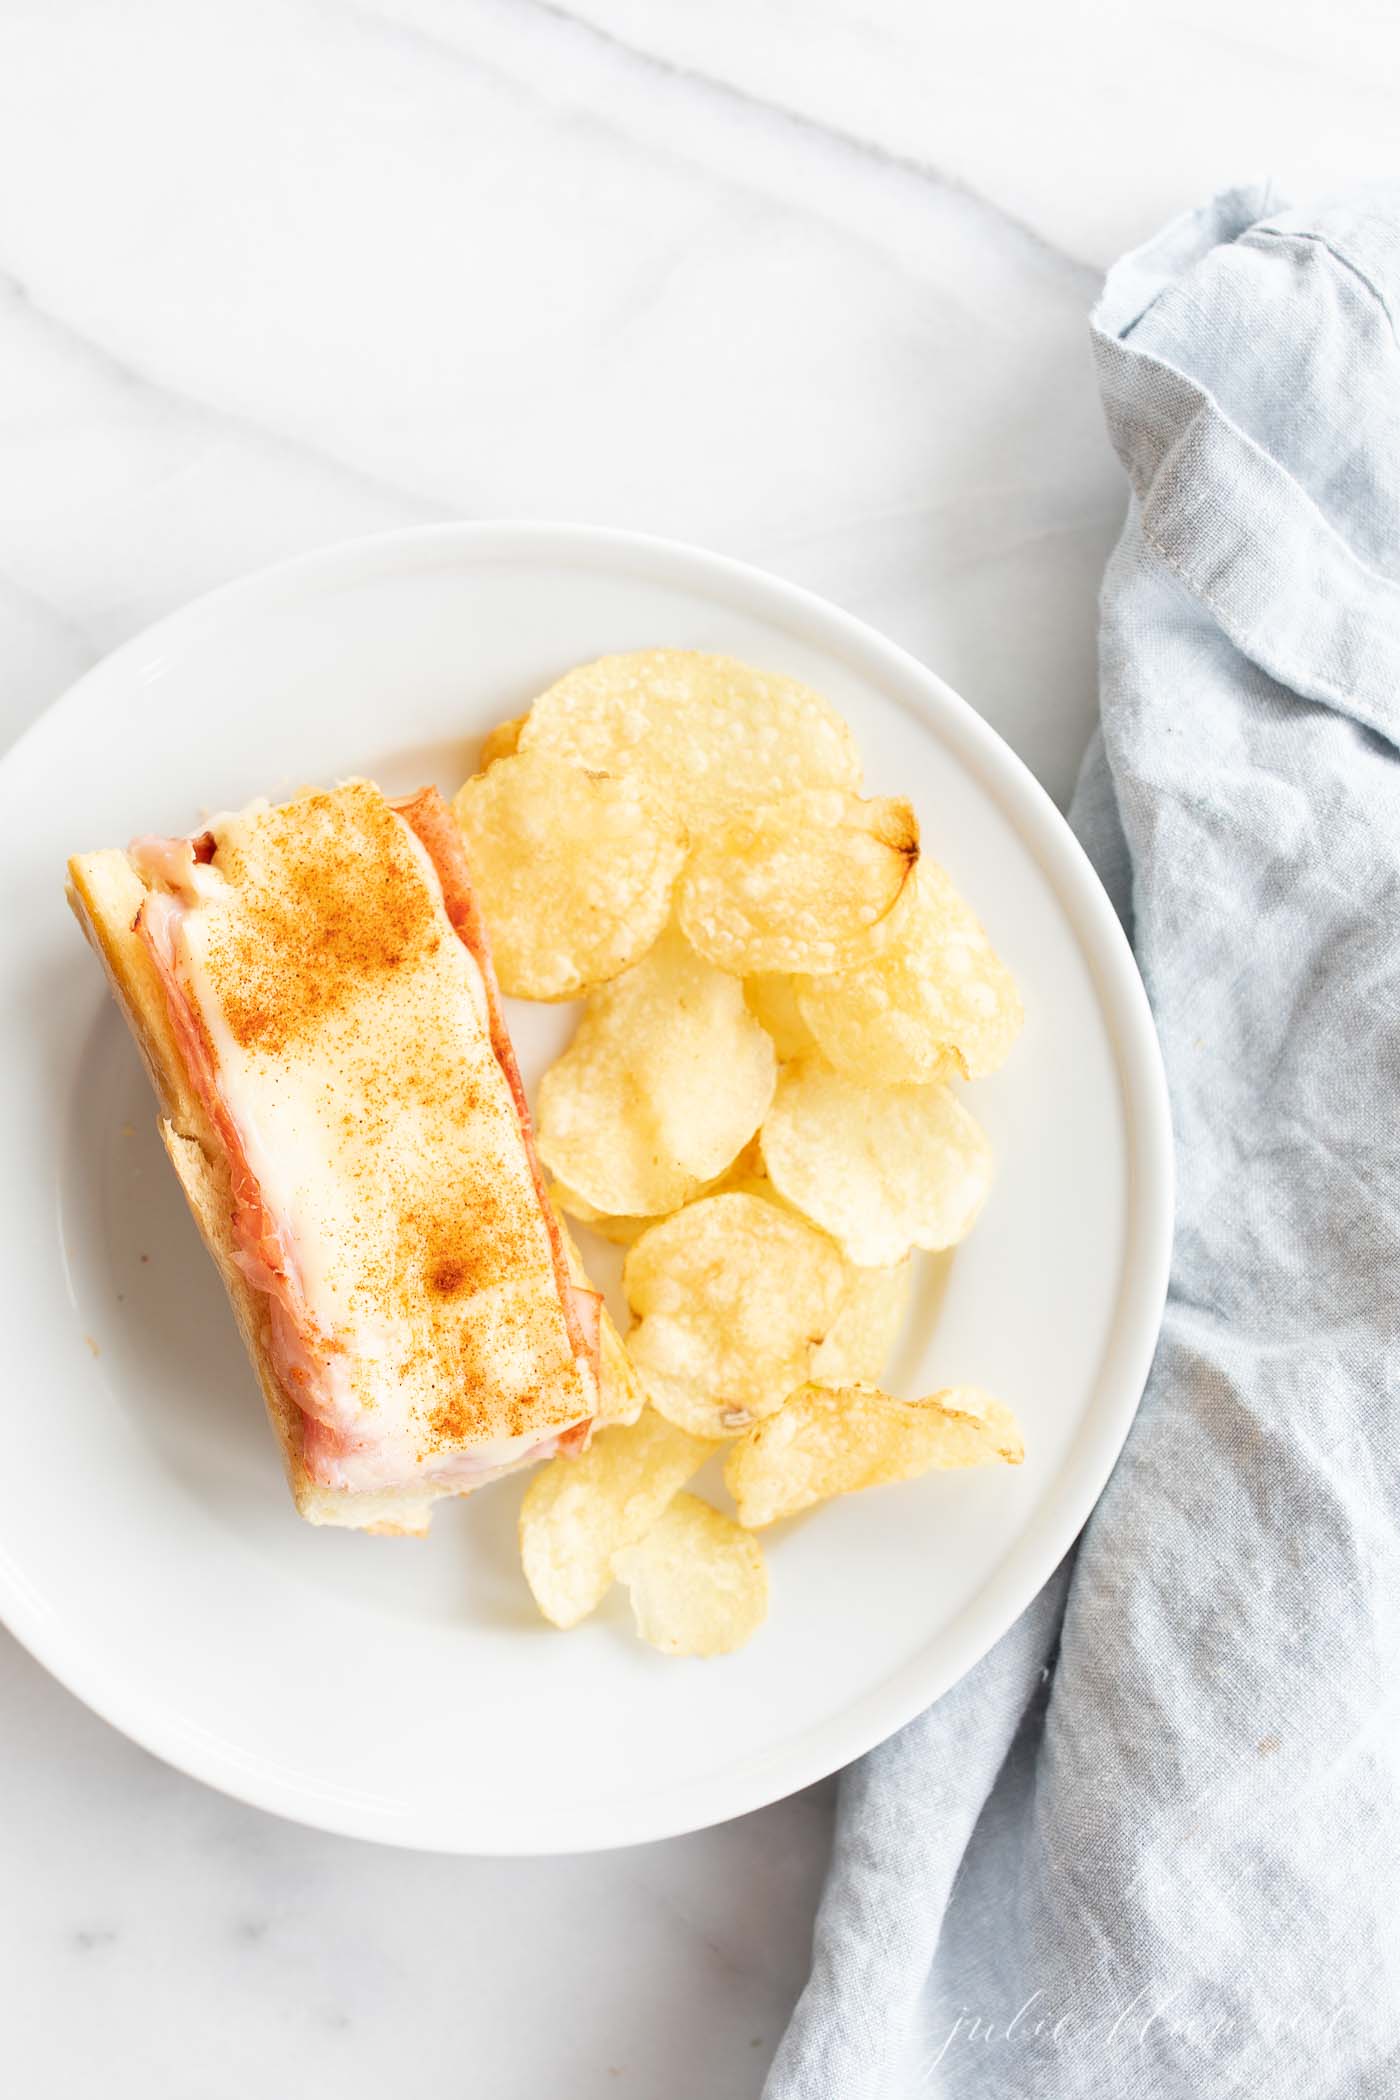 A gerber sandwich on a white plate, sprinkled with paprika with a side of chips.